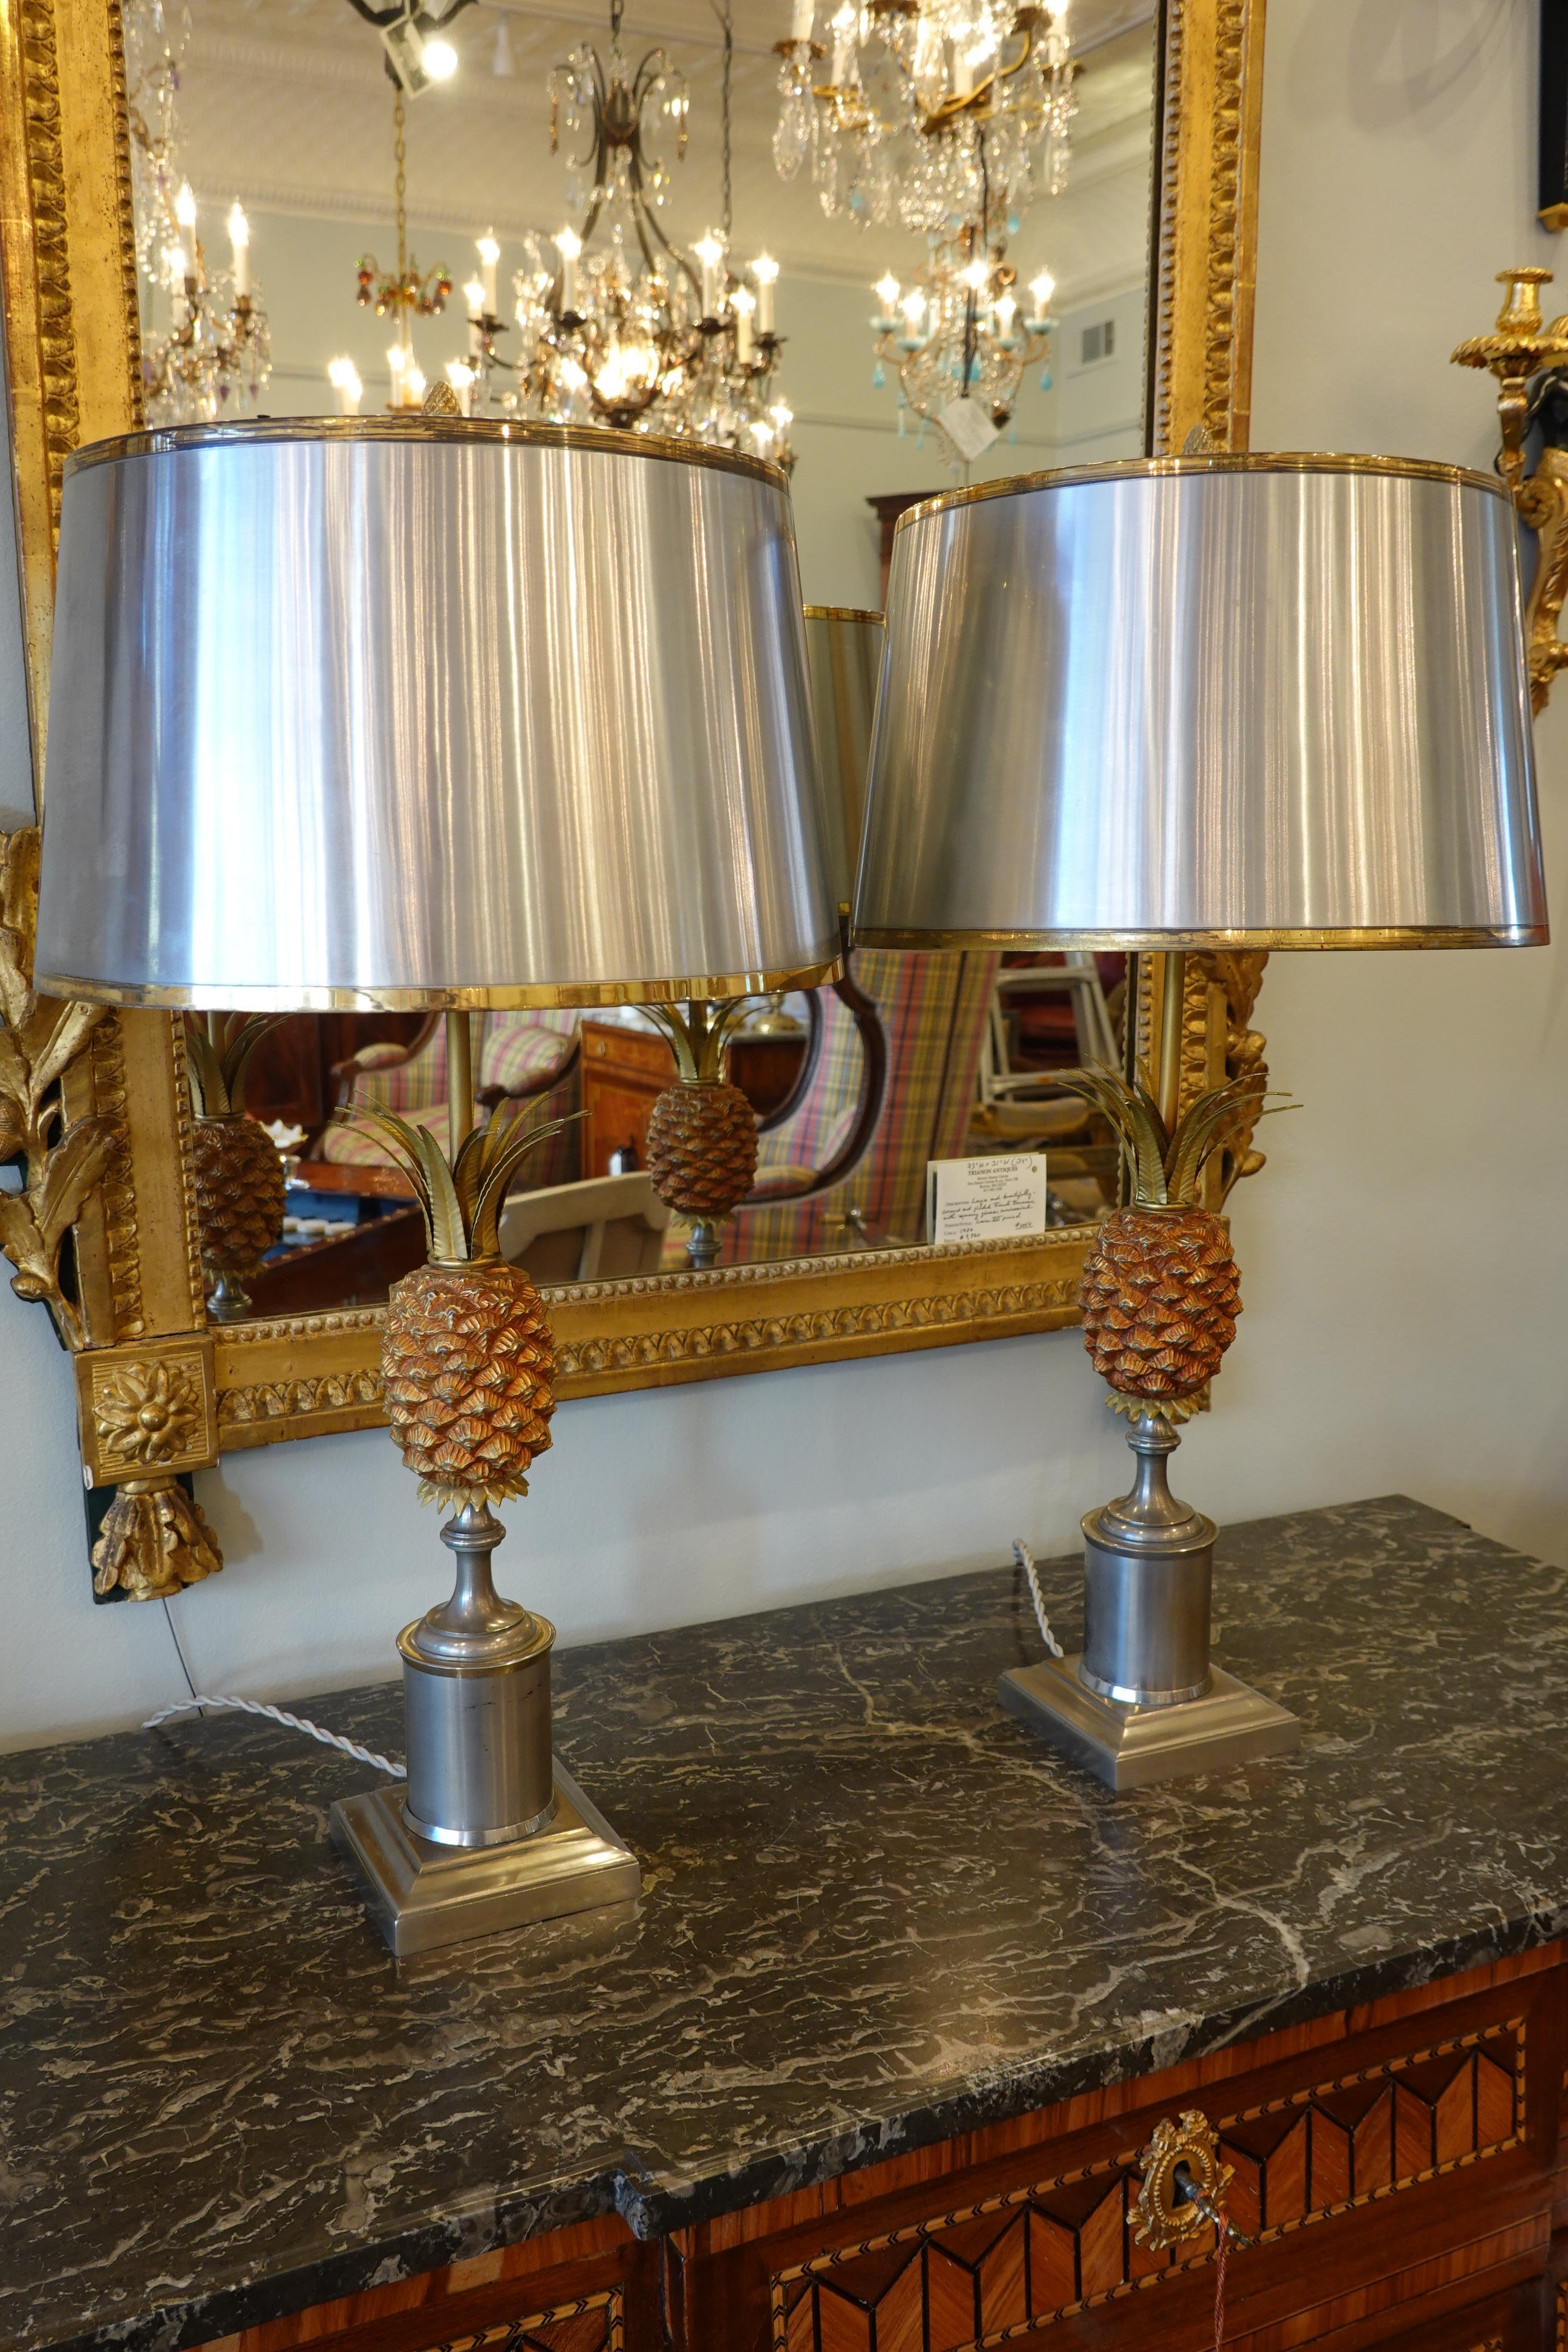 Pair of brushed steel lamps featuring a pineapple and steel shade in the style of Maison Jansen or Maison Charles. The shade is brushed steel to match the lamp base with brass trim, and has a stylized pine cone finial. The lamps have been rewired